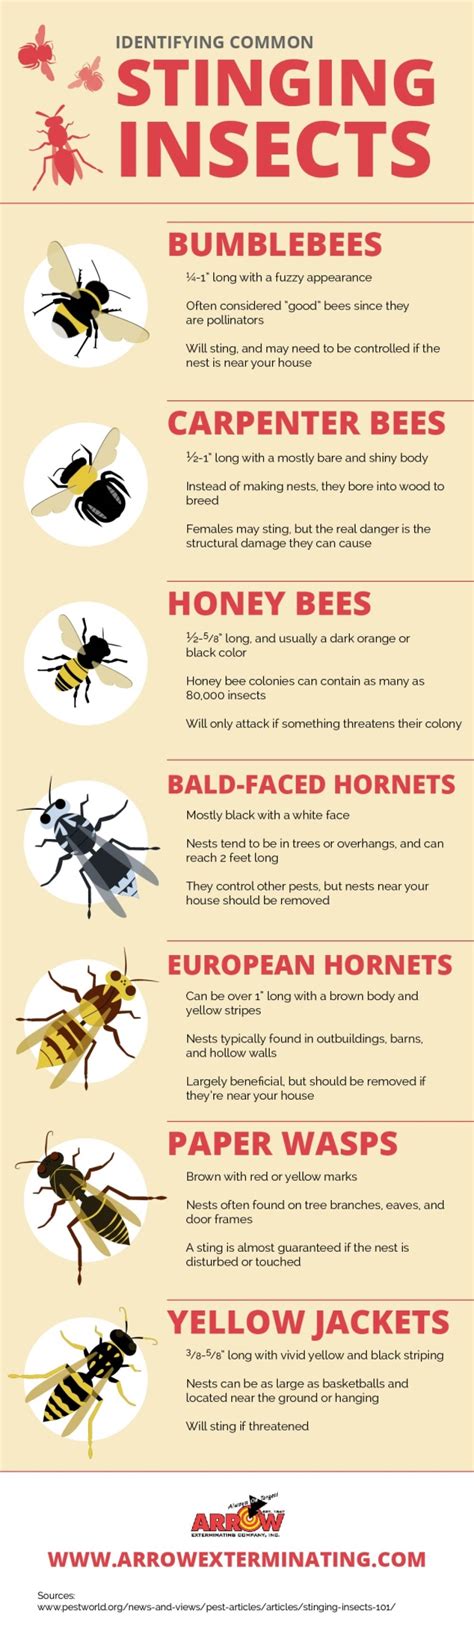 stinging insects come in many shapes and sizes click over to this infographic from a pest